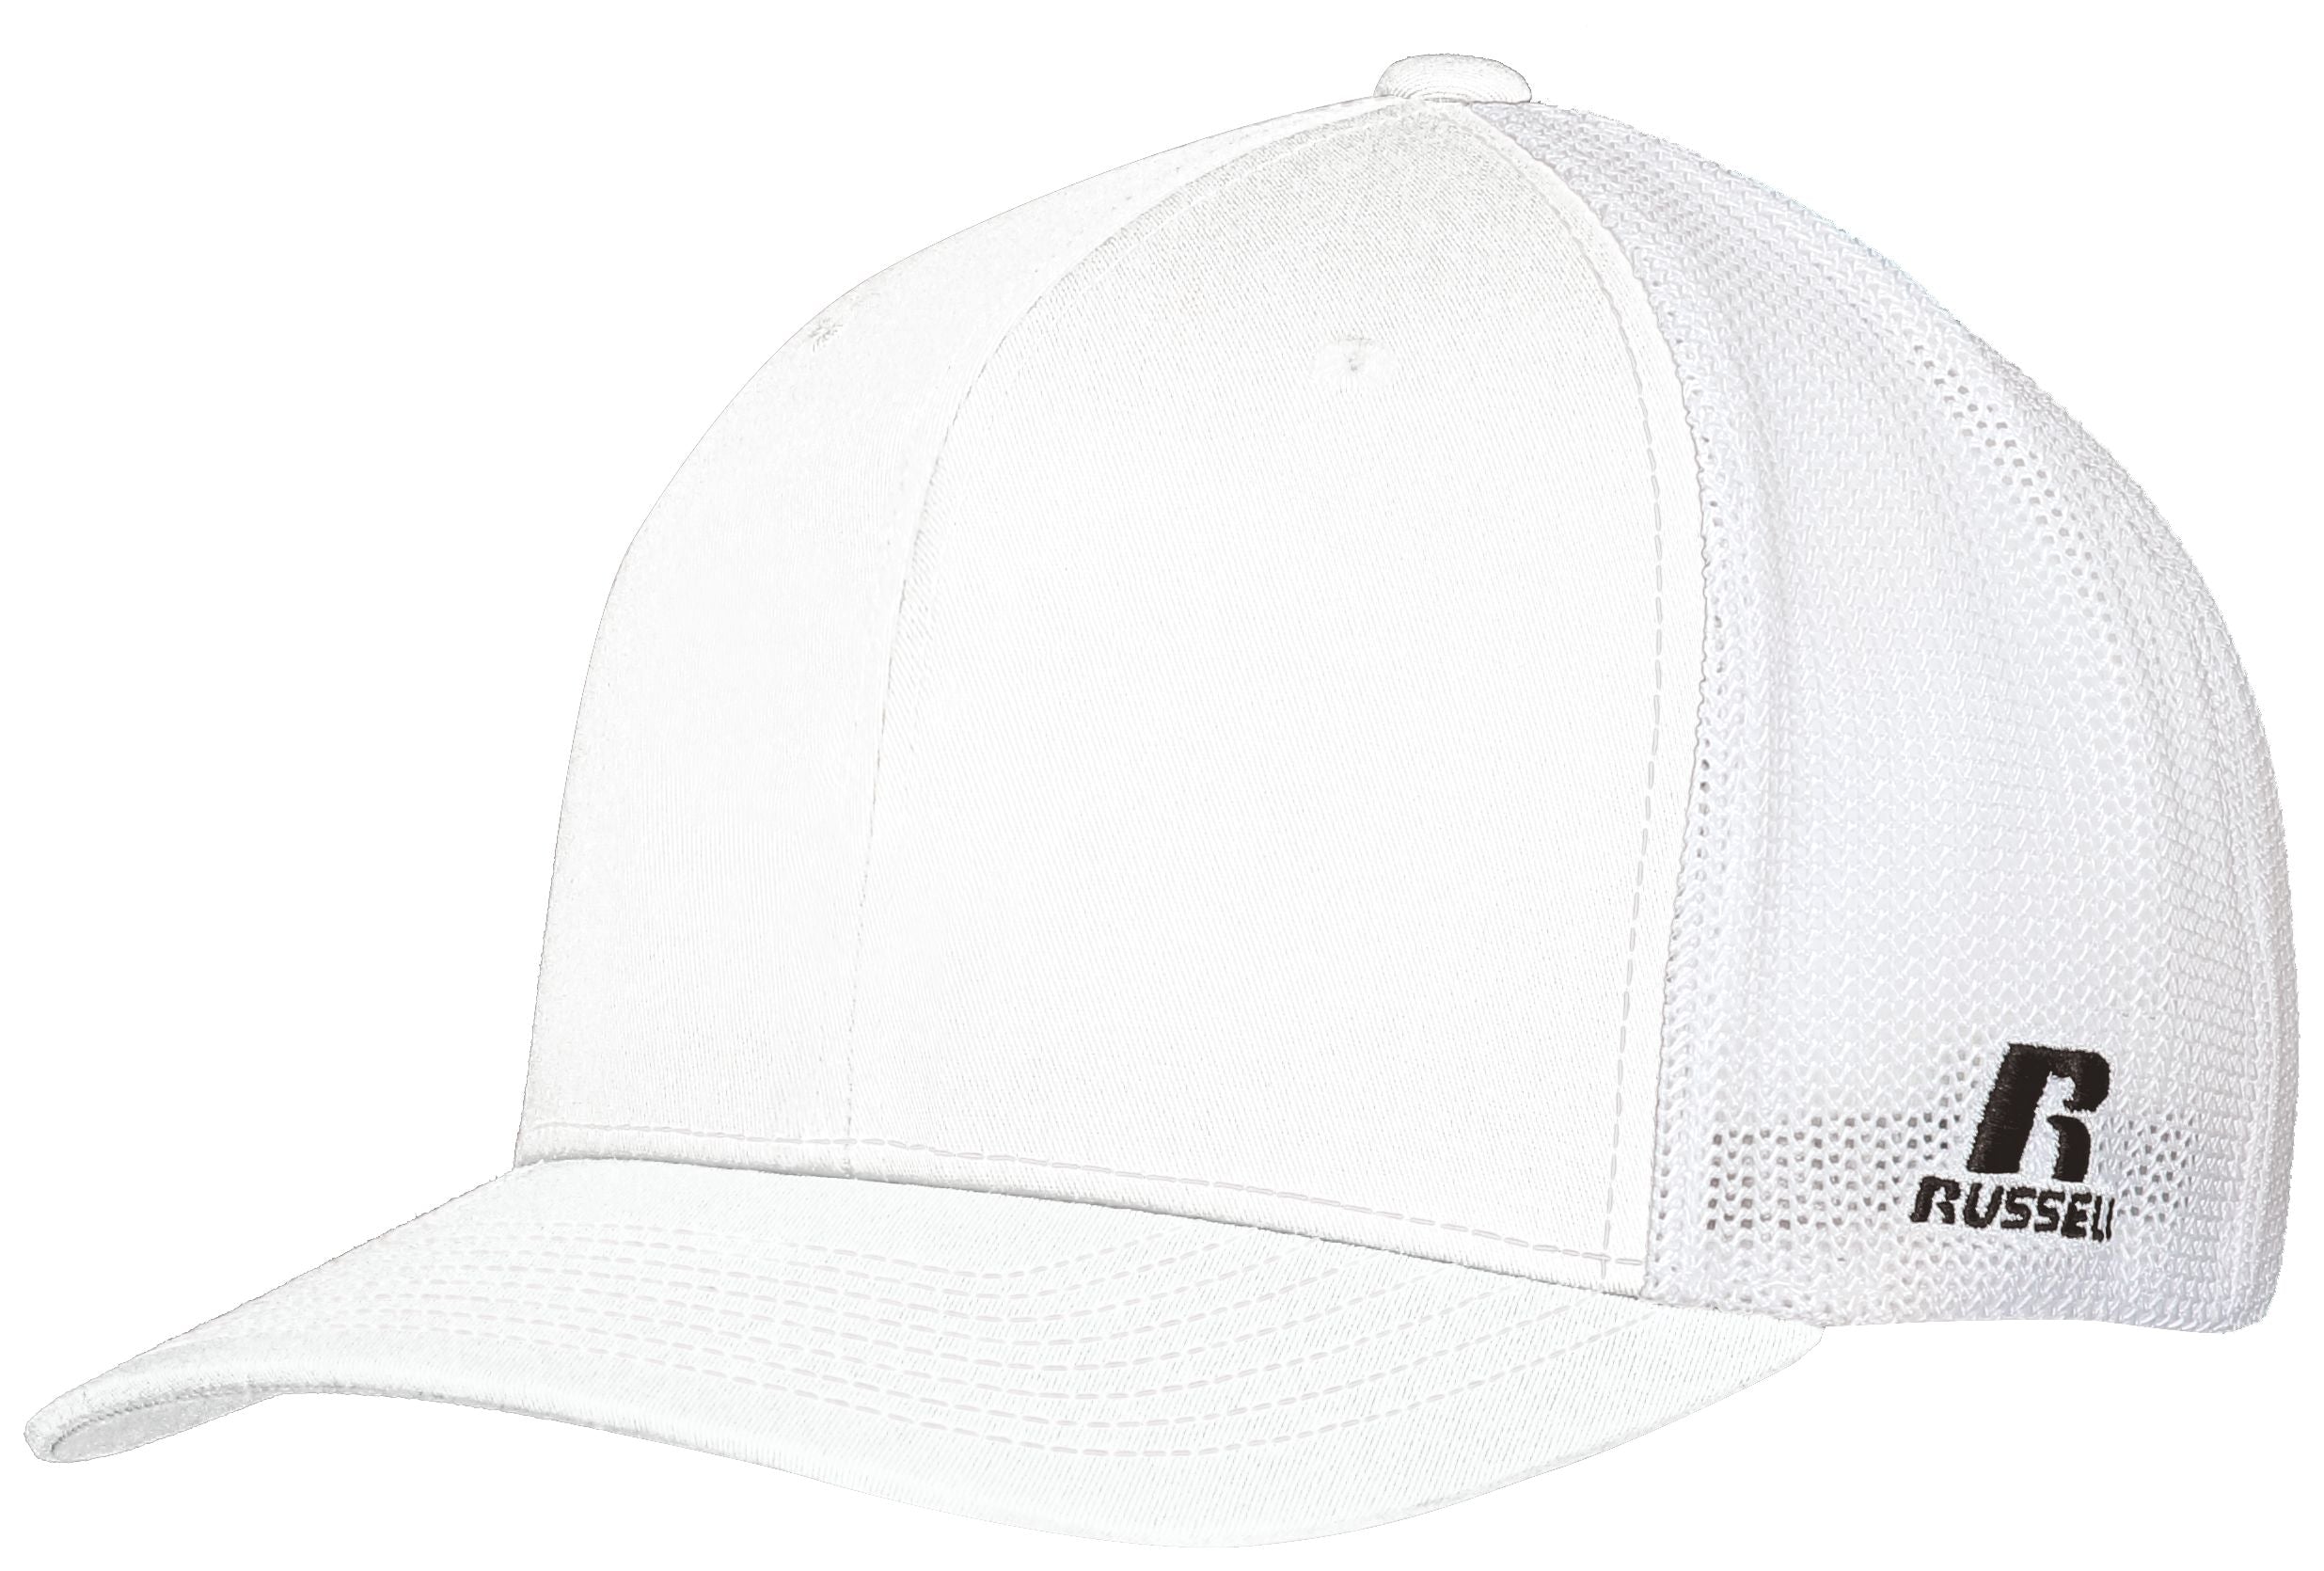 Russell Athletic Flexfit Twill Mesh Cap in White  -Part of the Adult, Headwear, Headwear-Cap, Russell-Athletic-Products product lines at KanaleyCreations.com